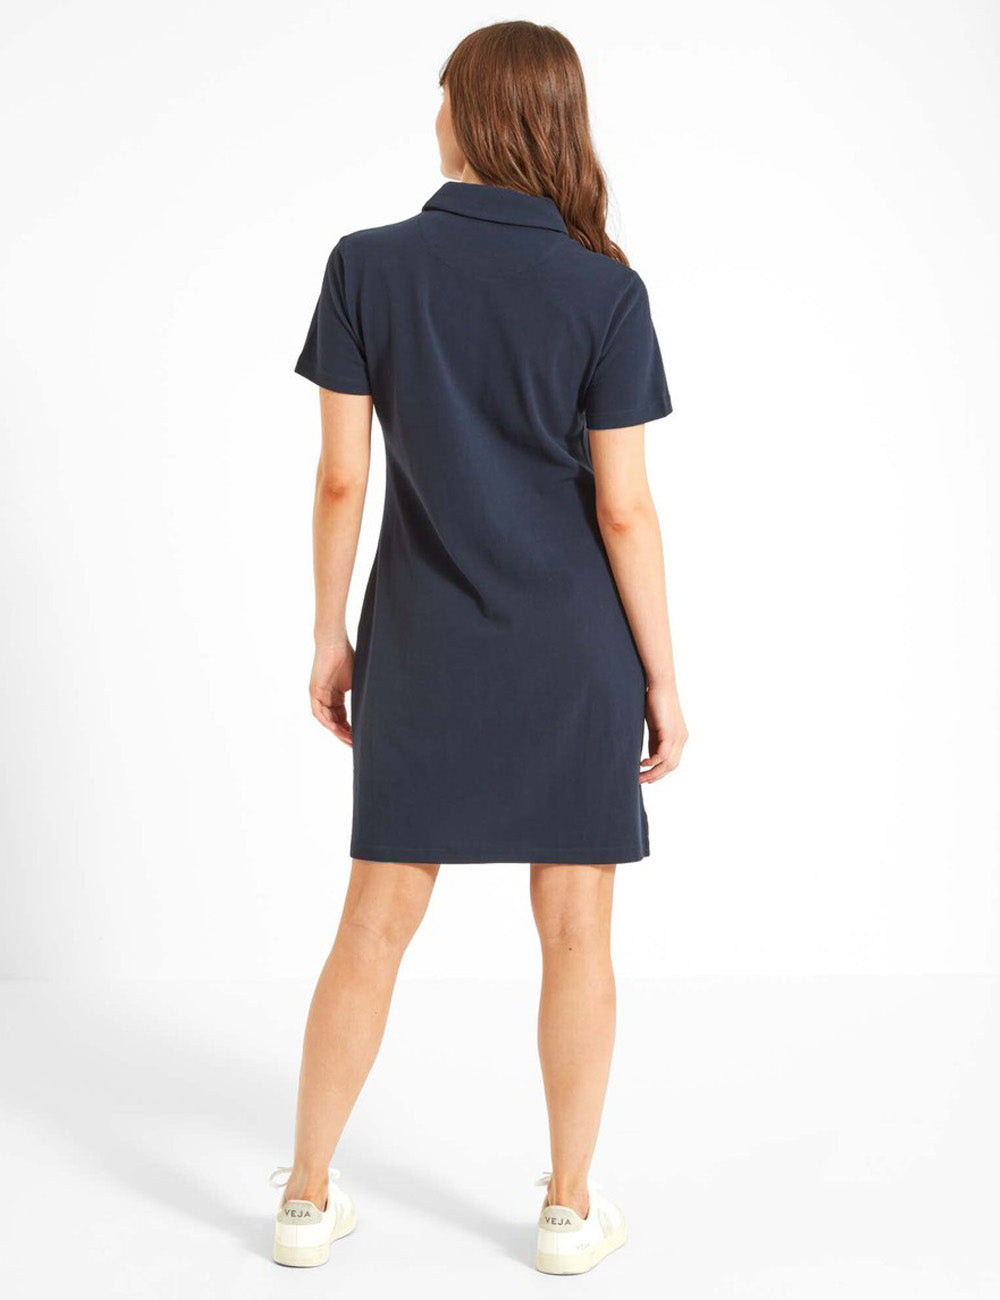 Woman facing away wearing the St. Ives Polo Dress with white trainers